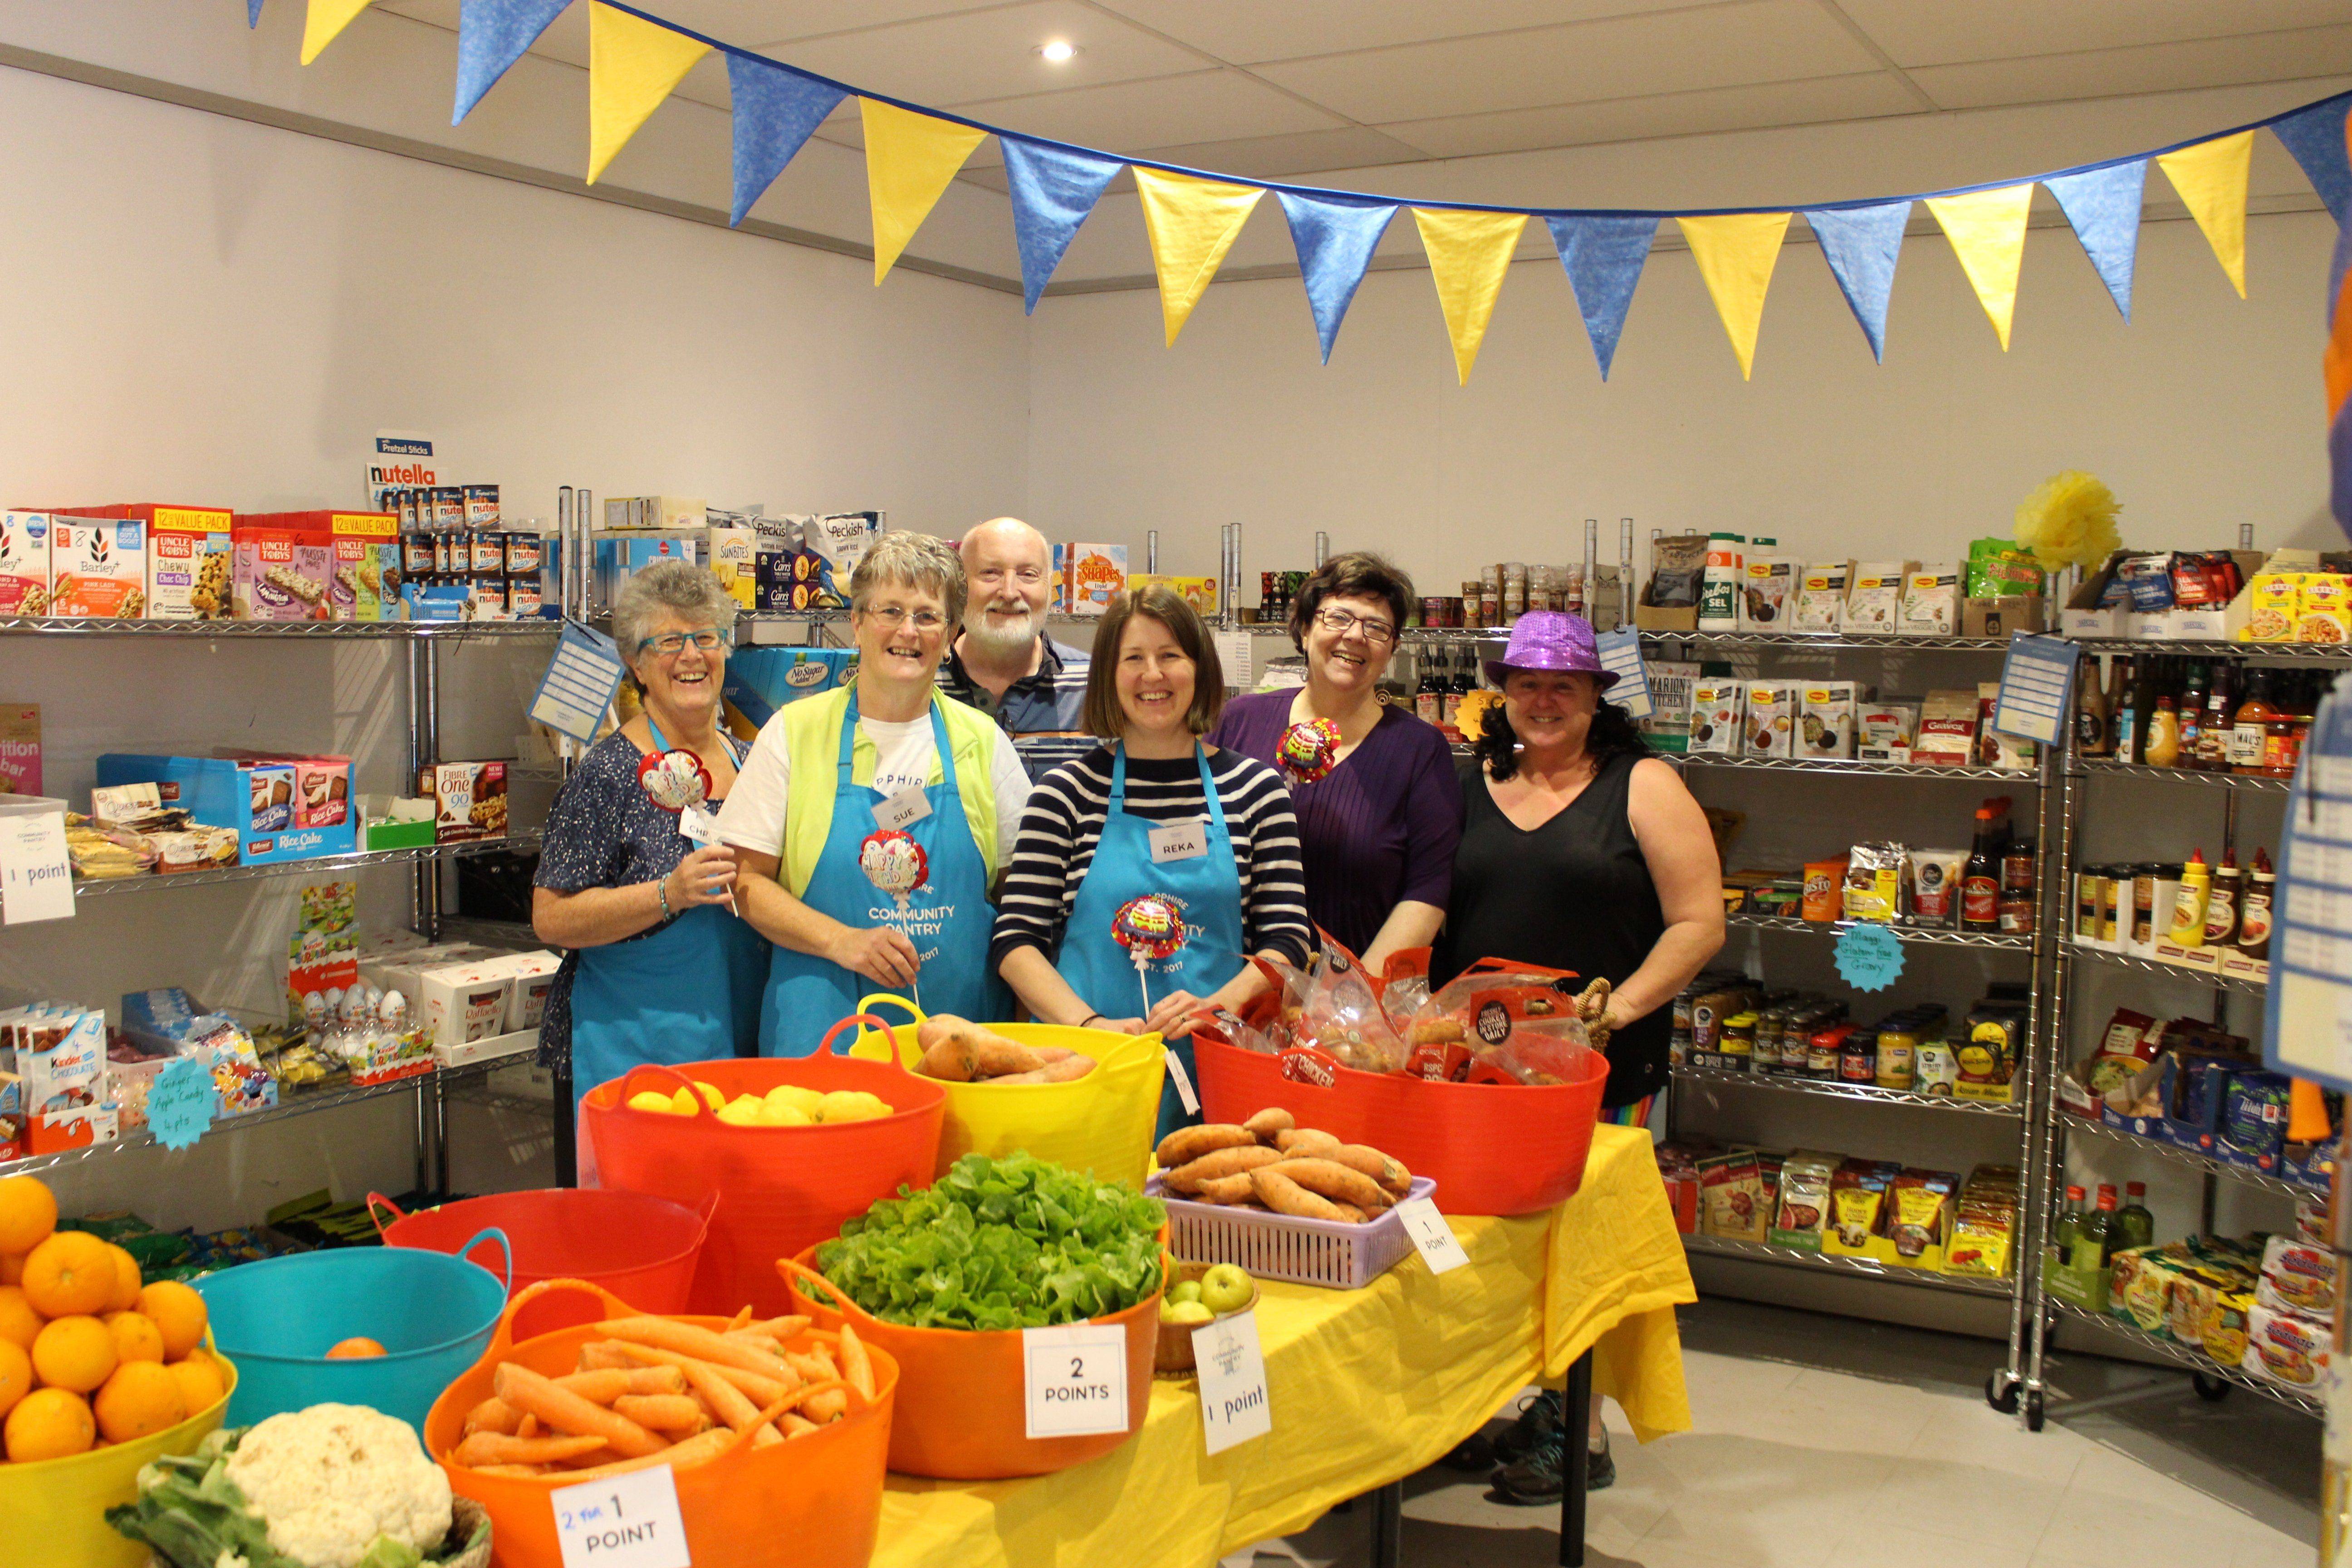 Birthday marks two years of good deeds for Sapphire Community Pantry